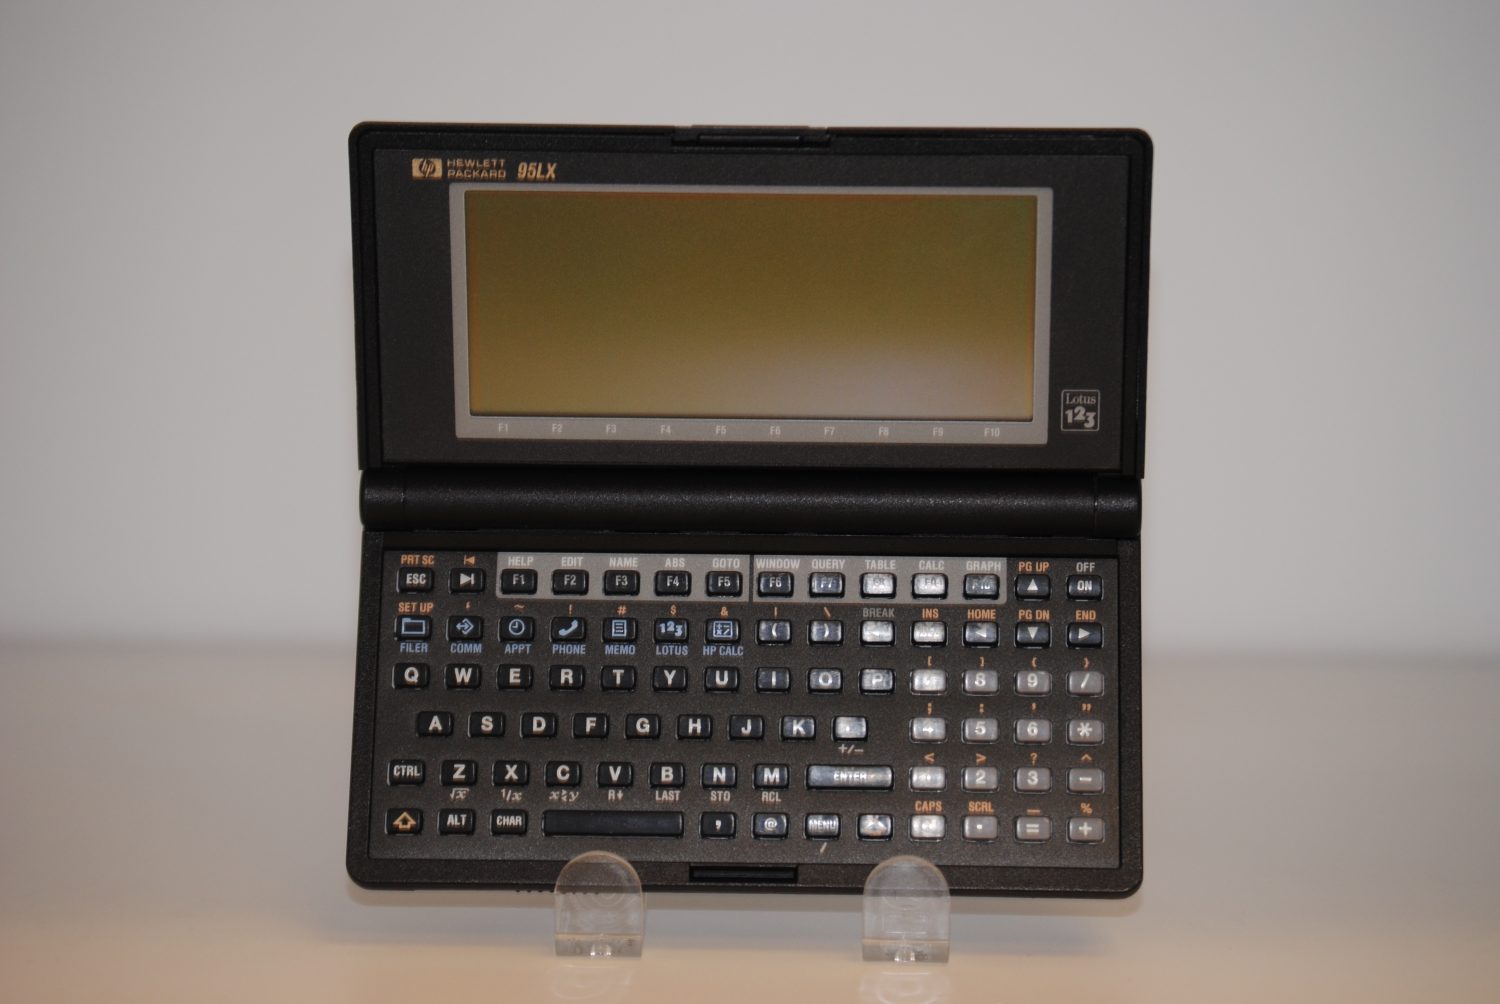 A photo of the HP95LX Palmtop PC.